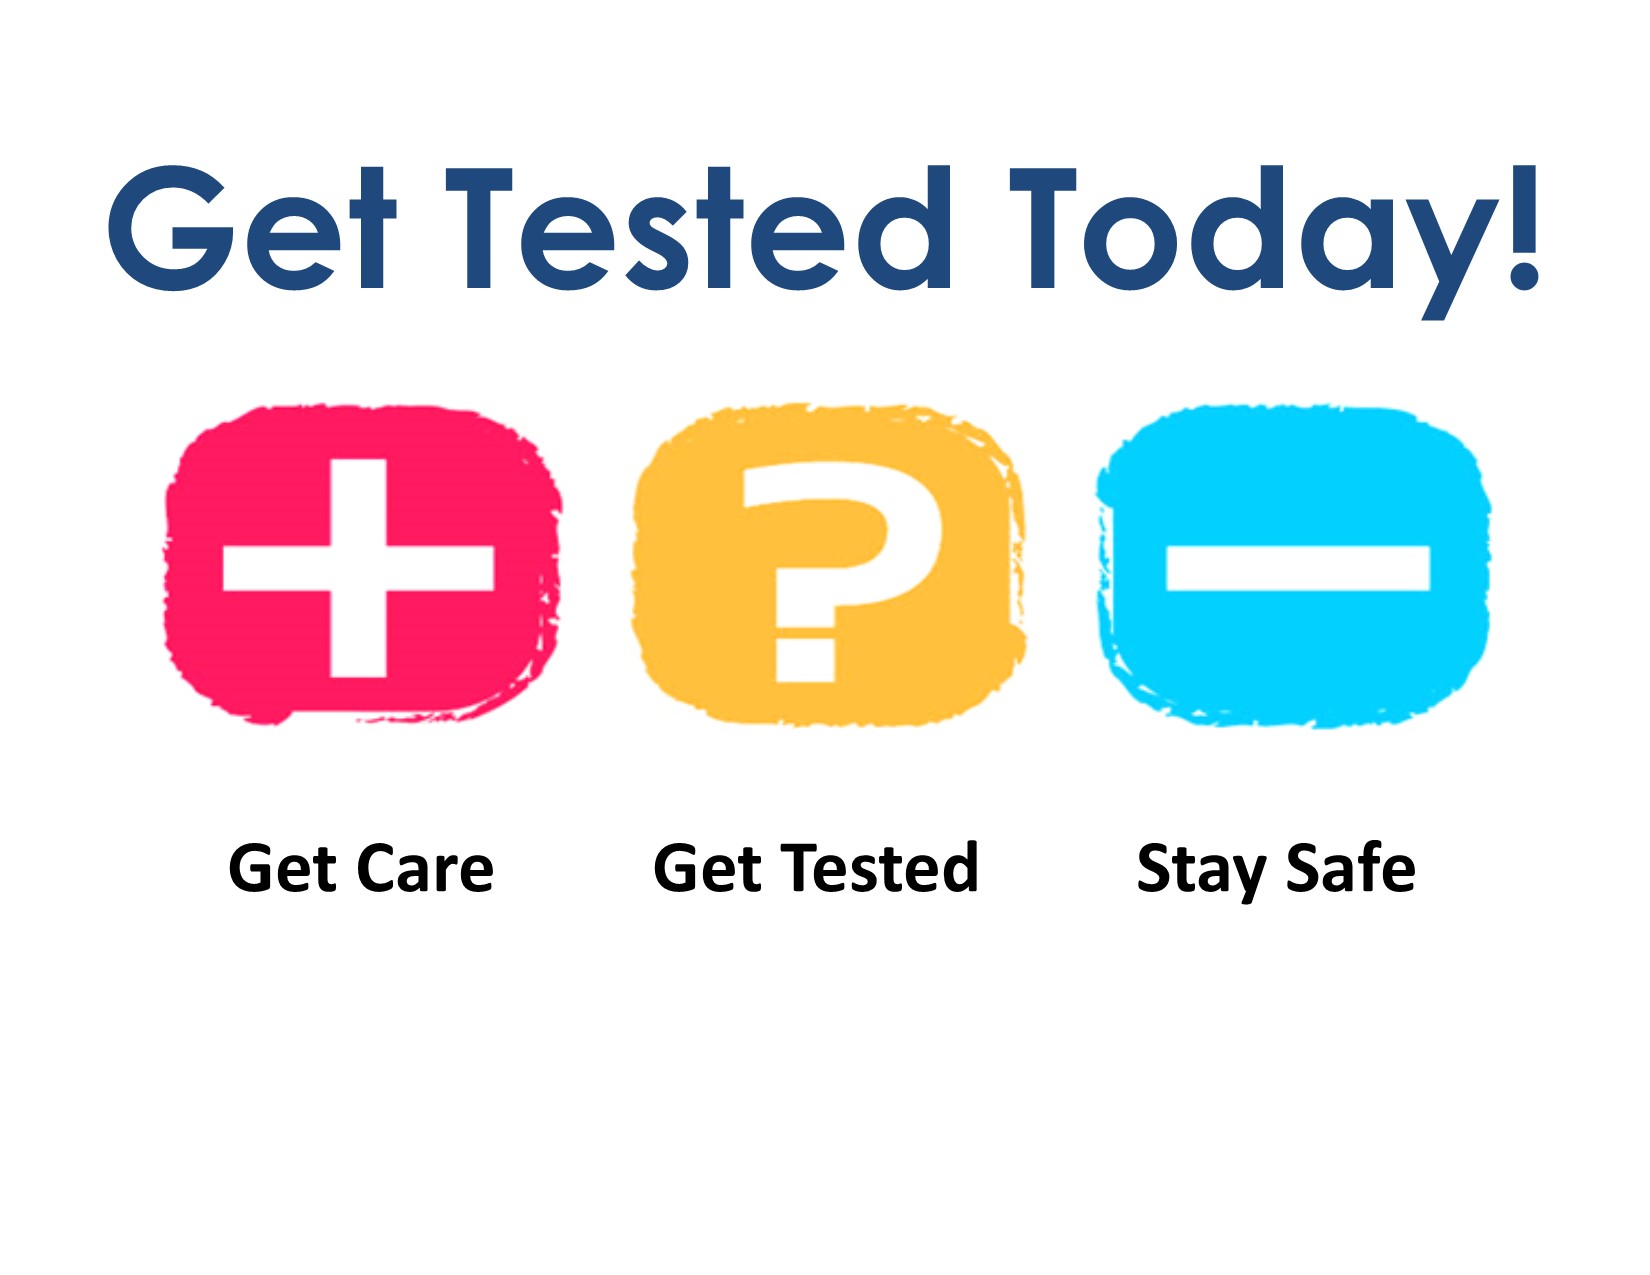 picture - Get Tested Today!